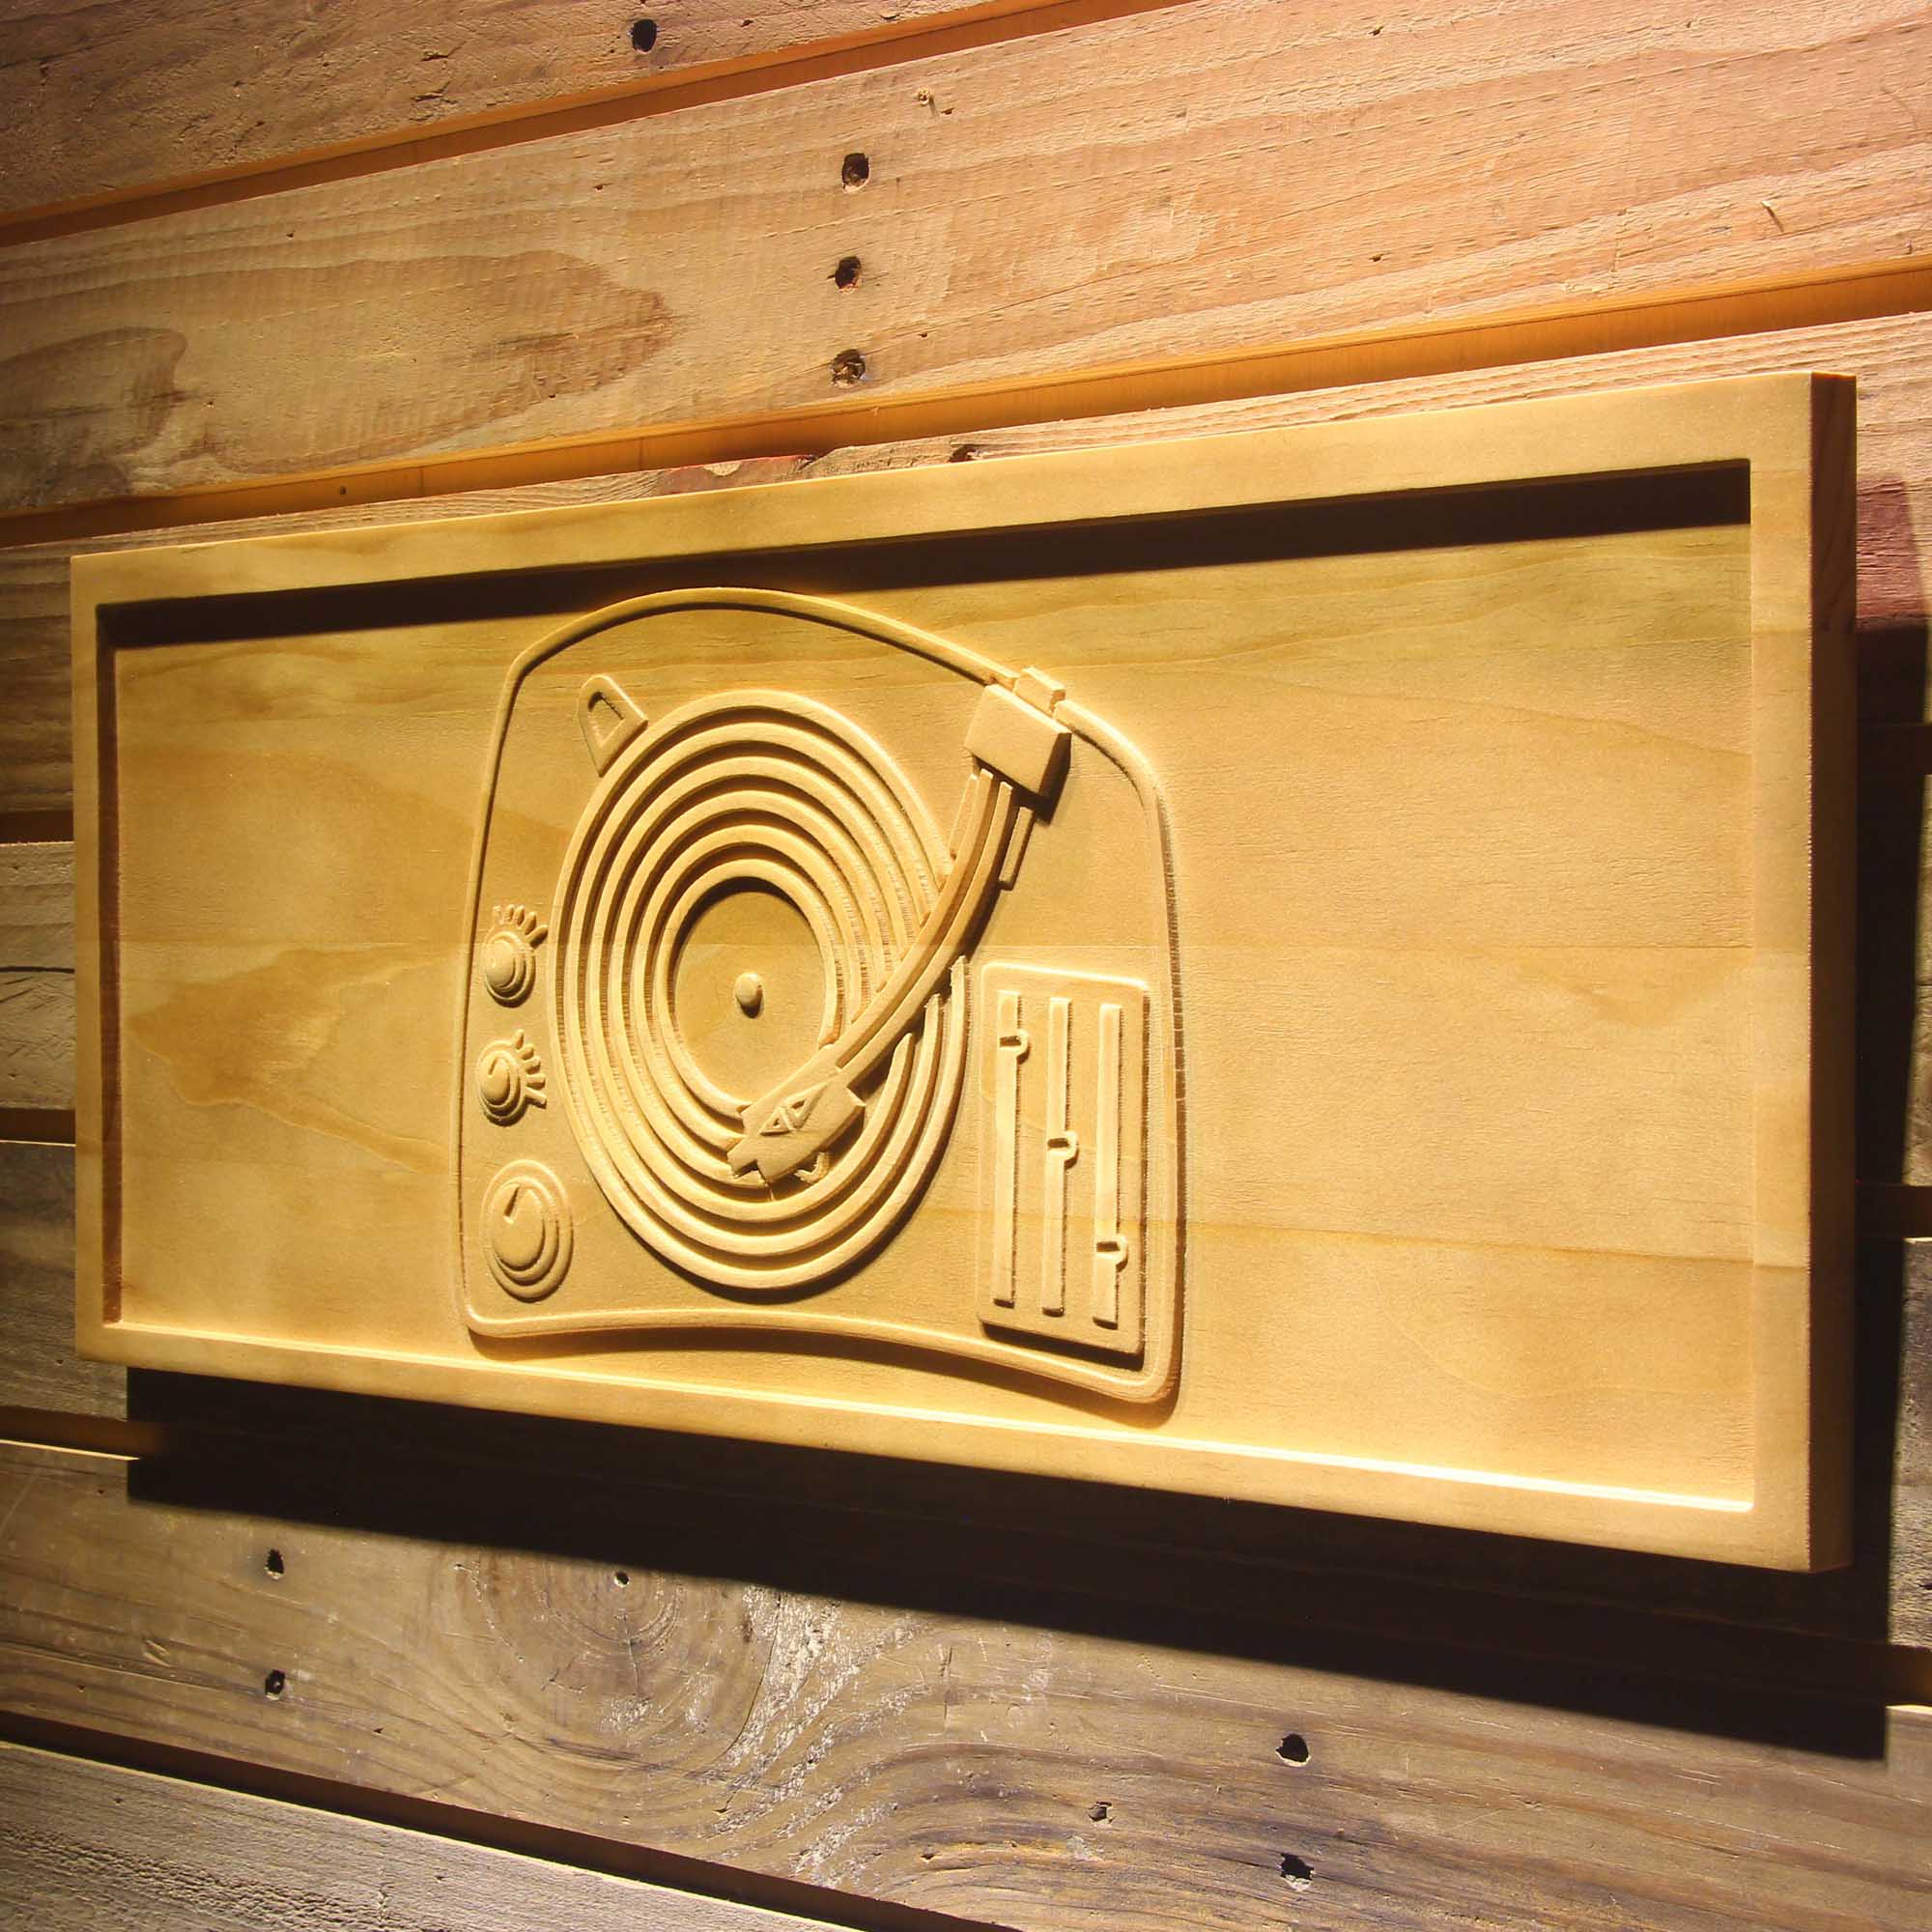 DJ Turntable Music 3D Wooden Engrave Sign